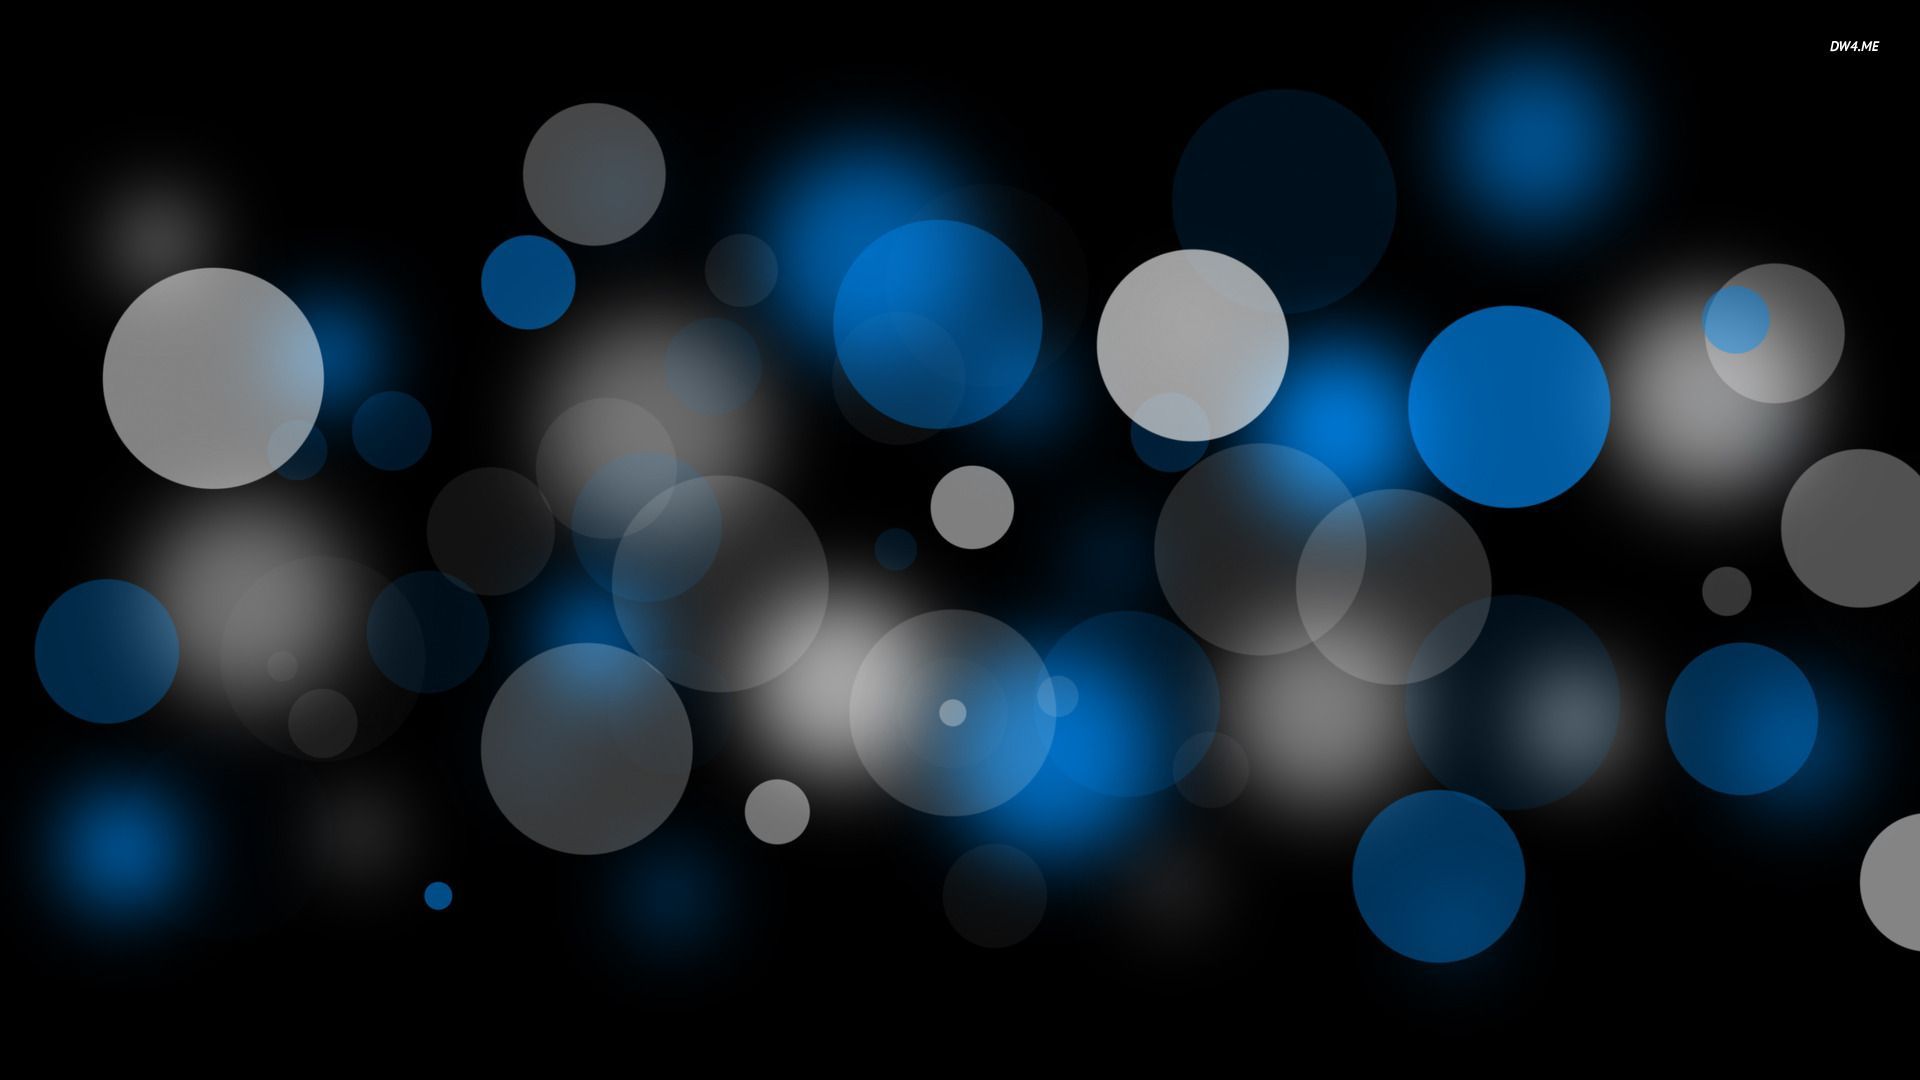 Blue and white bubbles wallpaper - Abstract wallpapers - #805